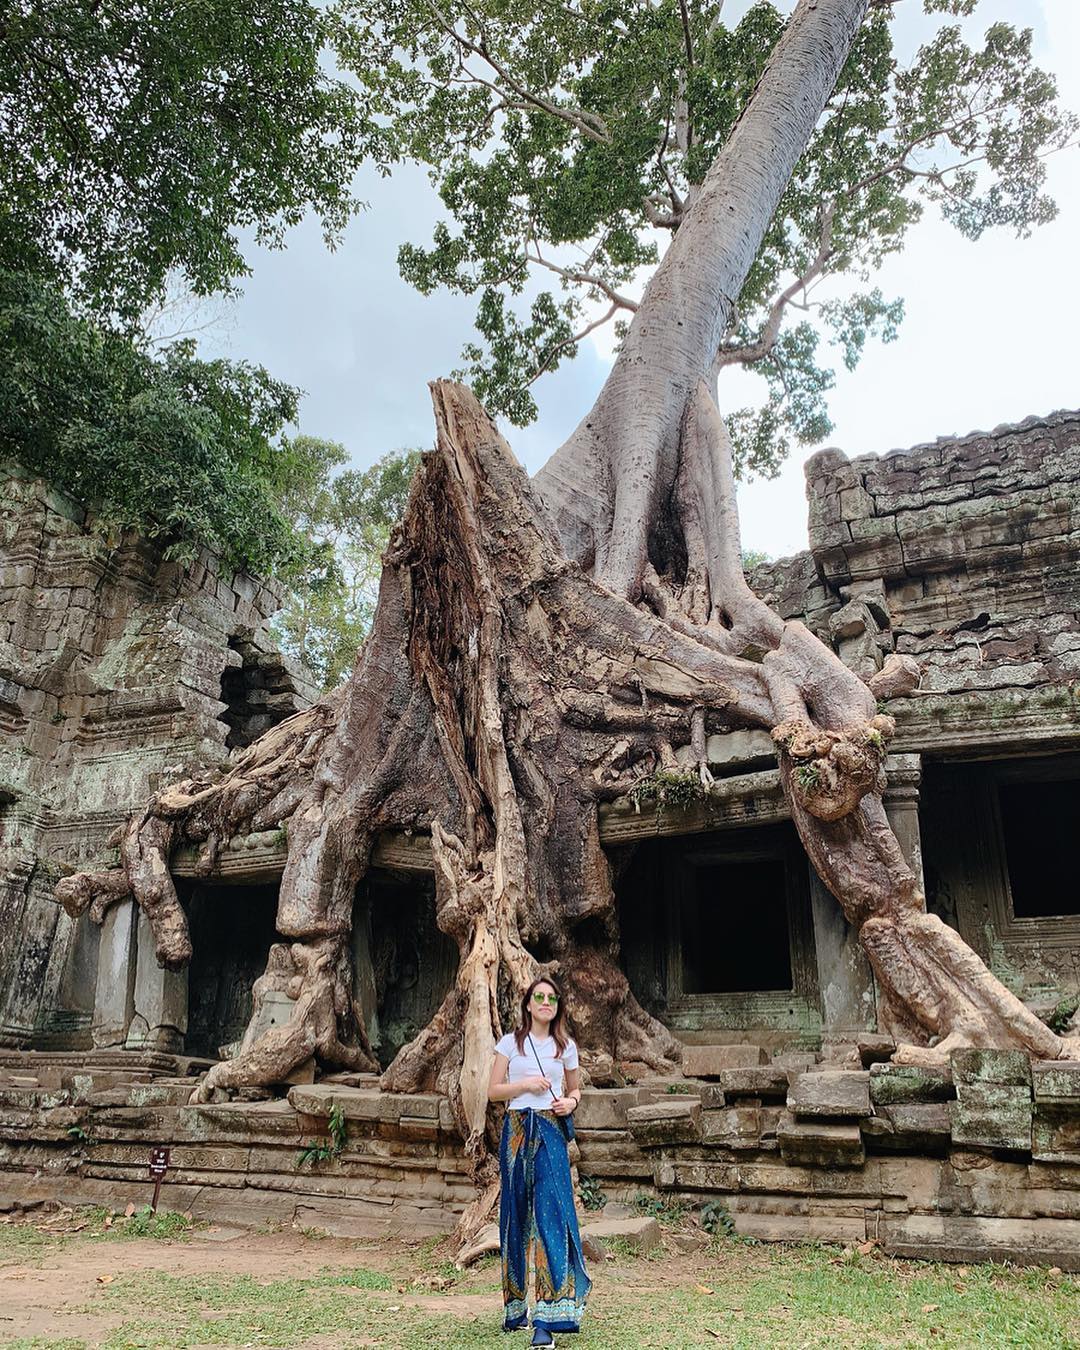 [Test] Watch the Sunrise Over Angkor Watt & X Other Things M'sians Should Have on Their Bucket List - WORLD OF BUZZ 14